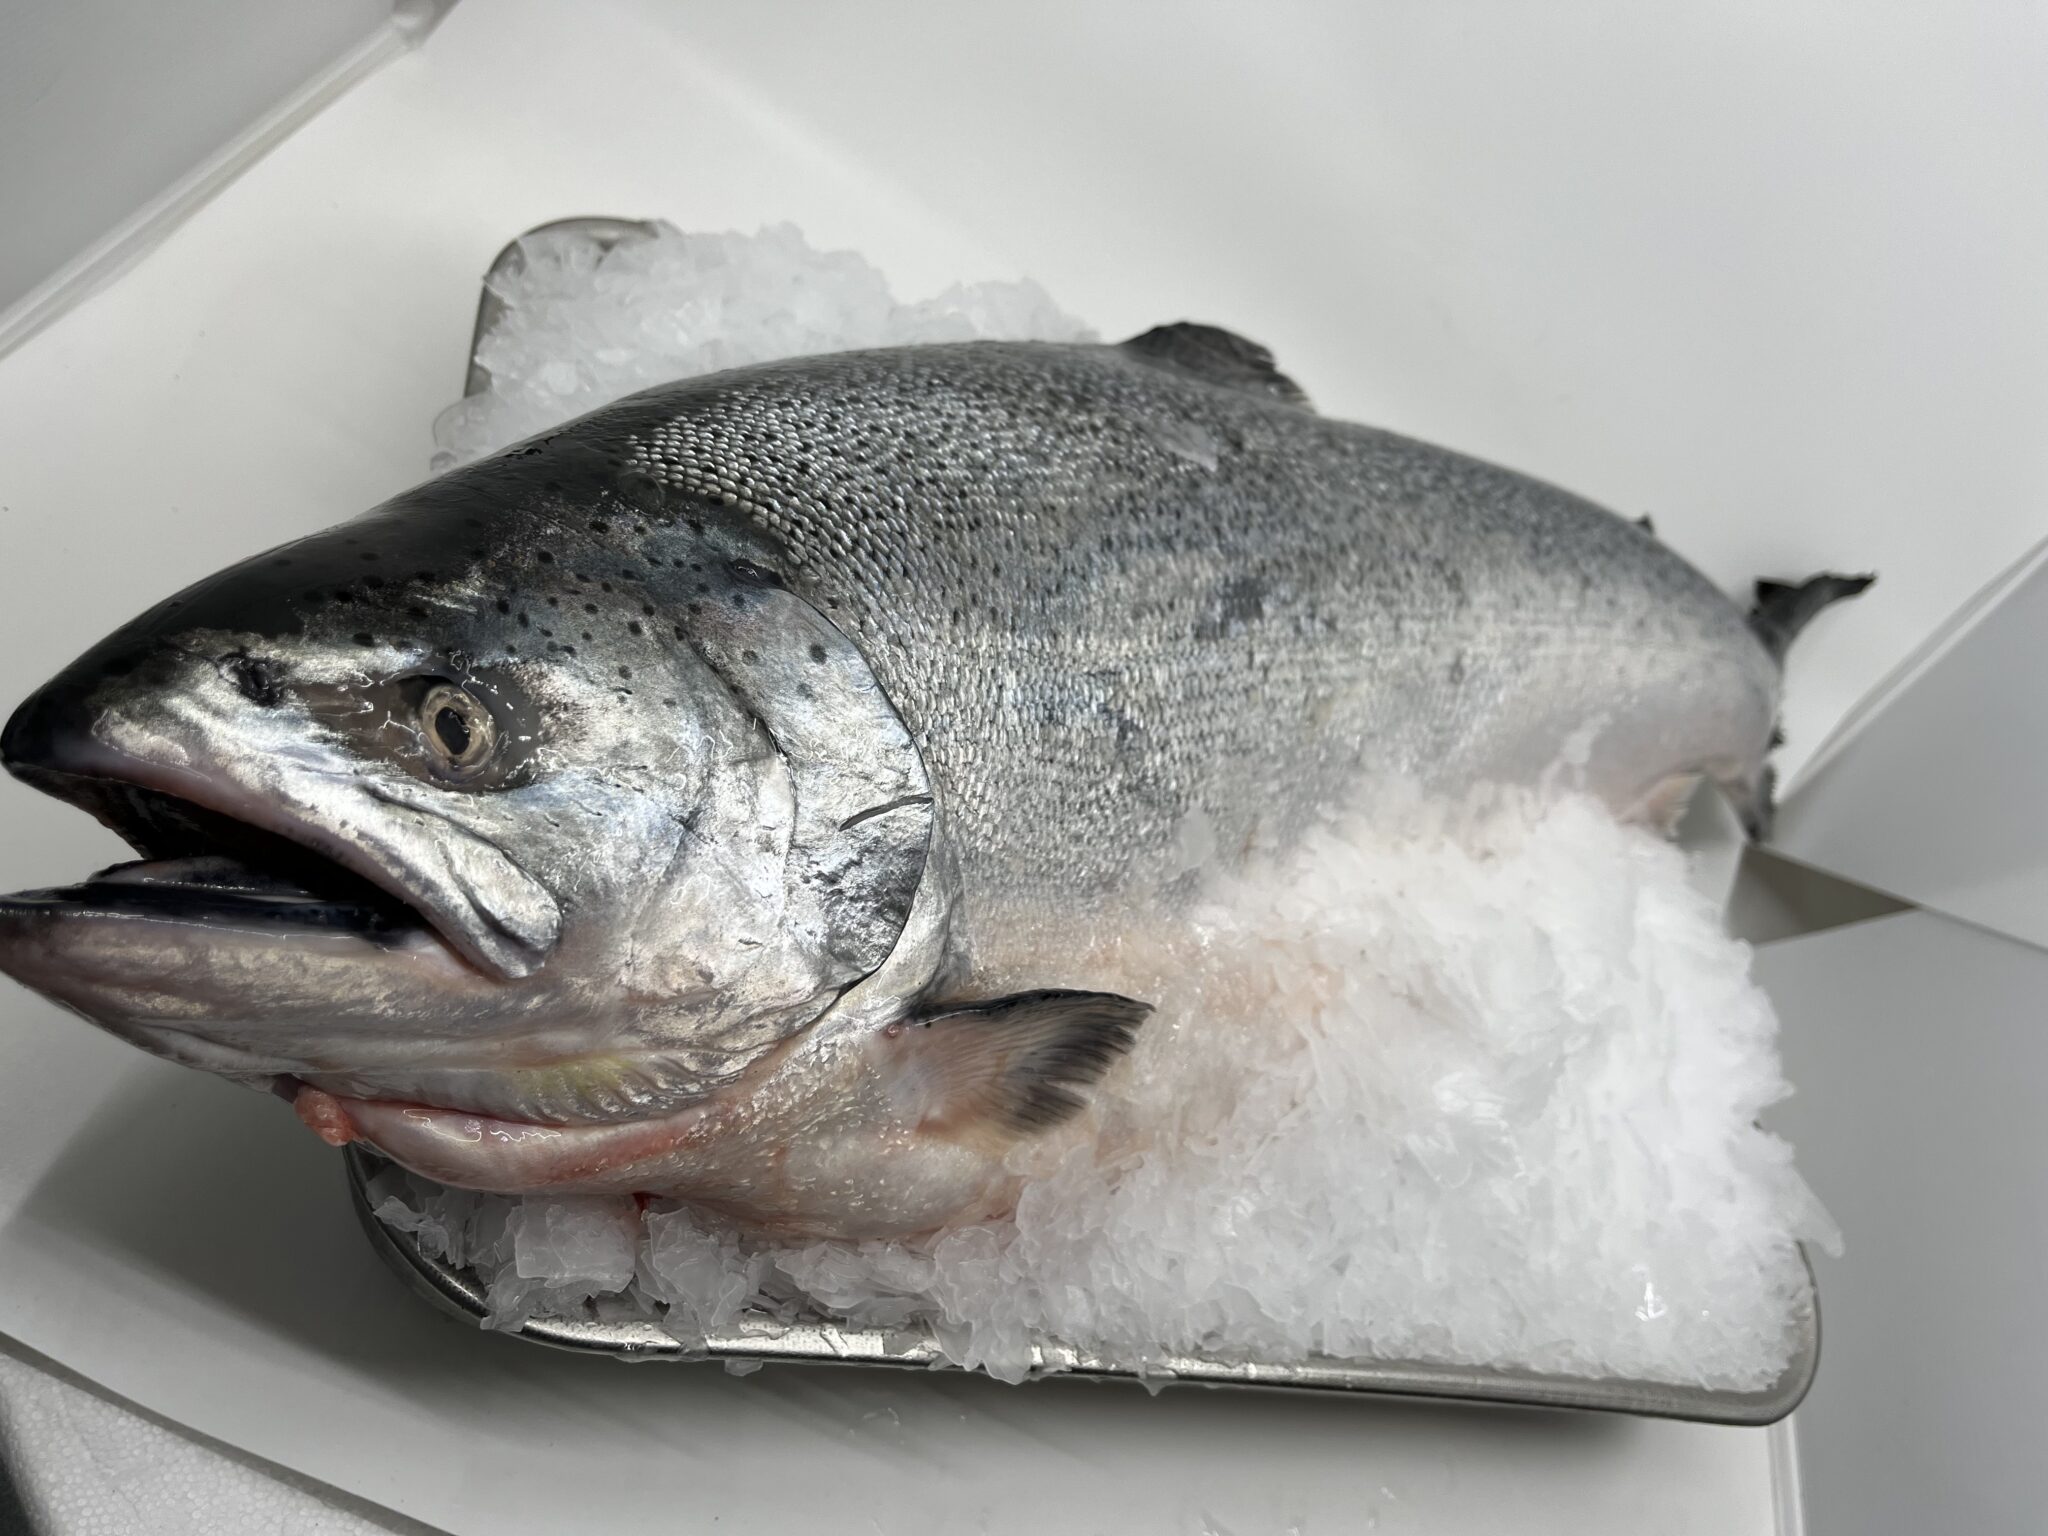 Whole Nz Salmon 4.5kg - 5kg Gutted - The One That Got Away